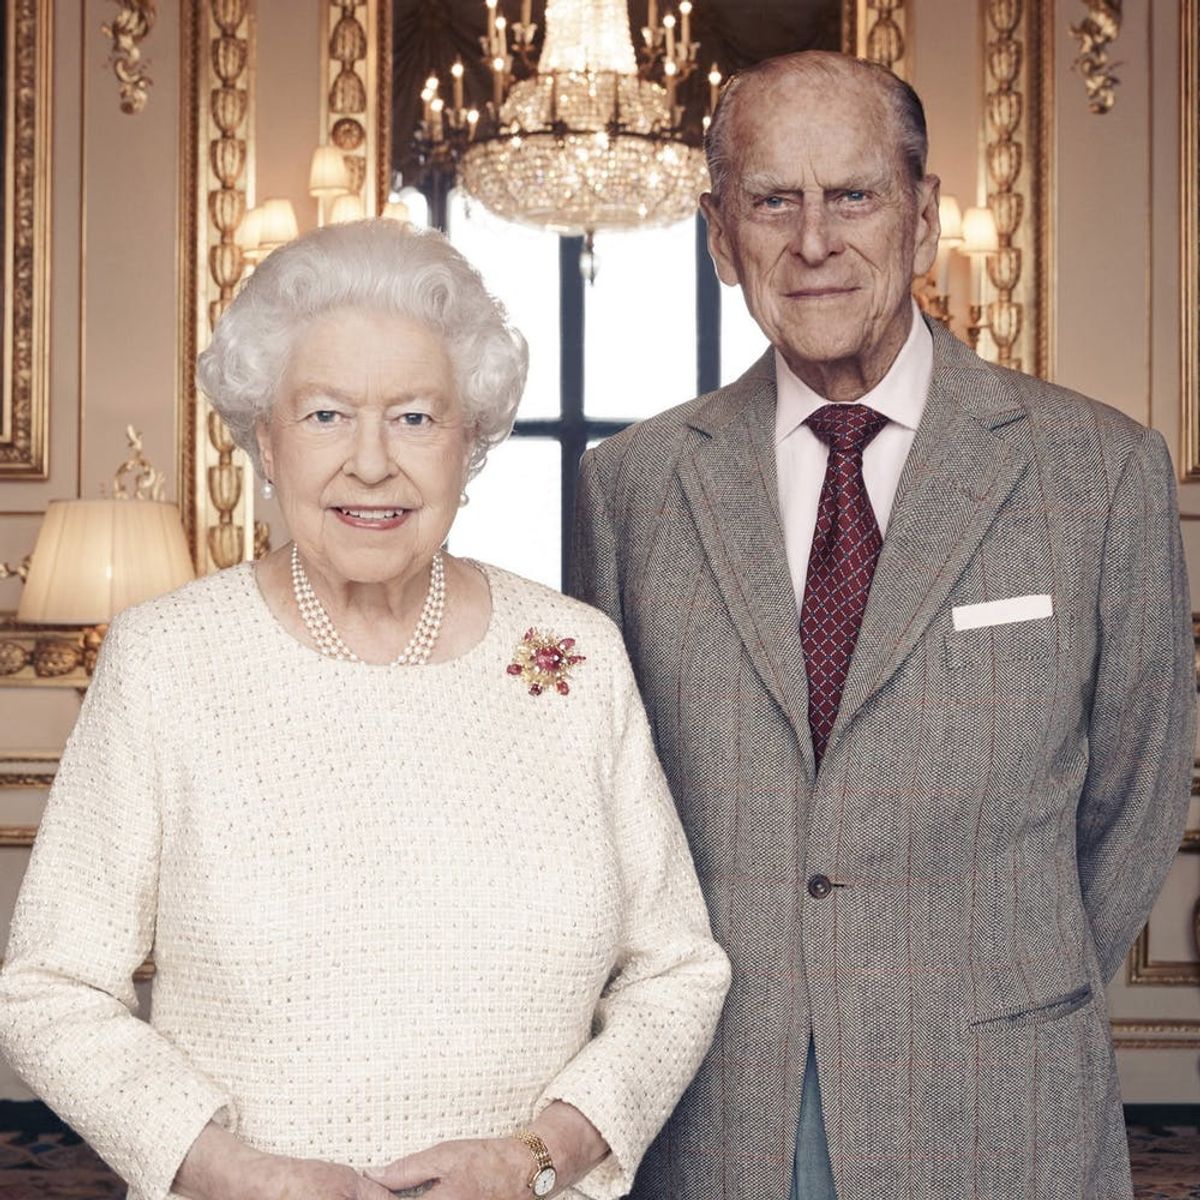 Queen Elizabeth Just Gave Prince Philip the Most Meaningful 70th Anniversary Gift